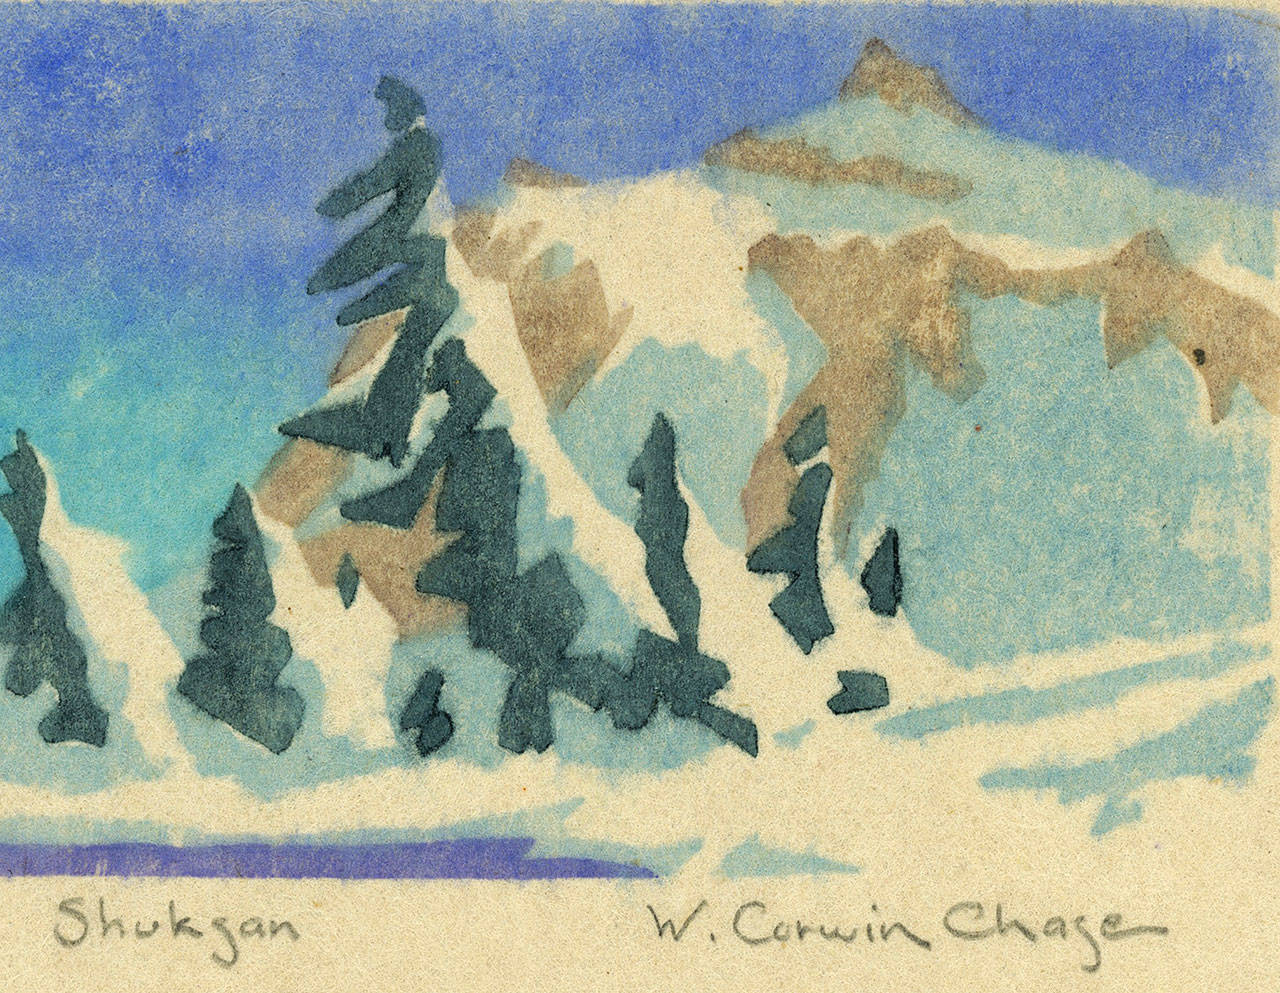 “Vintage Christmas Cards by Northwest Artists,” with works from the 1900s to the ’90s will also be on display at the Cascadia Art Museum through Jan. 6. Shown is Corwin Chase’s “Mount Shuksan” from 1928.